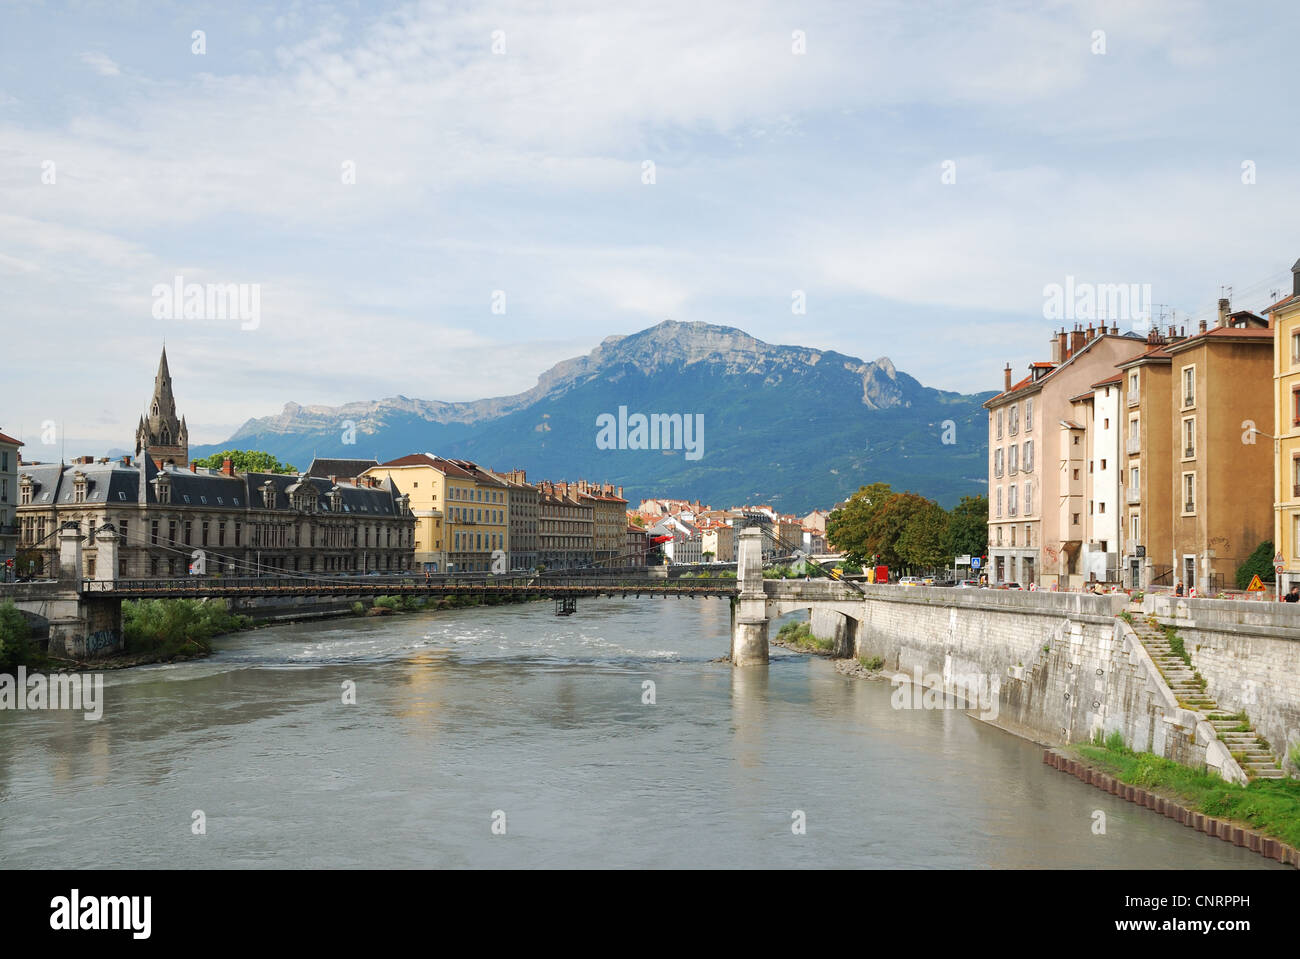 View of Grenoble with the wide river Isere. Stock Photo